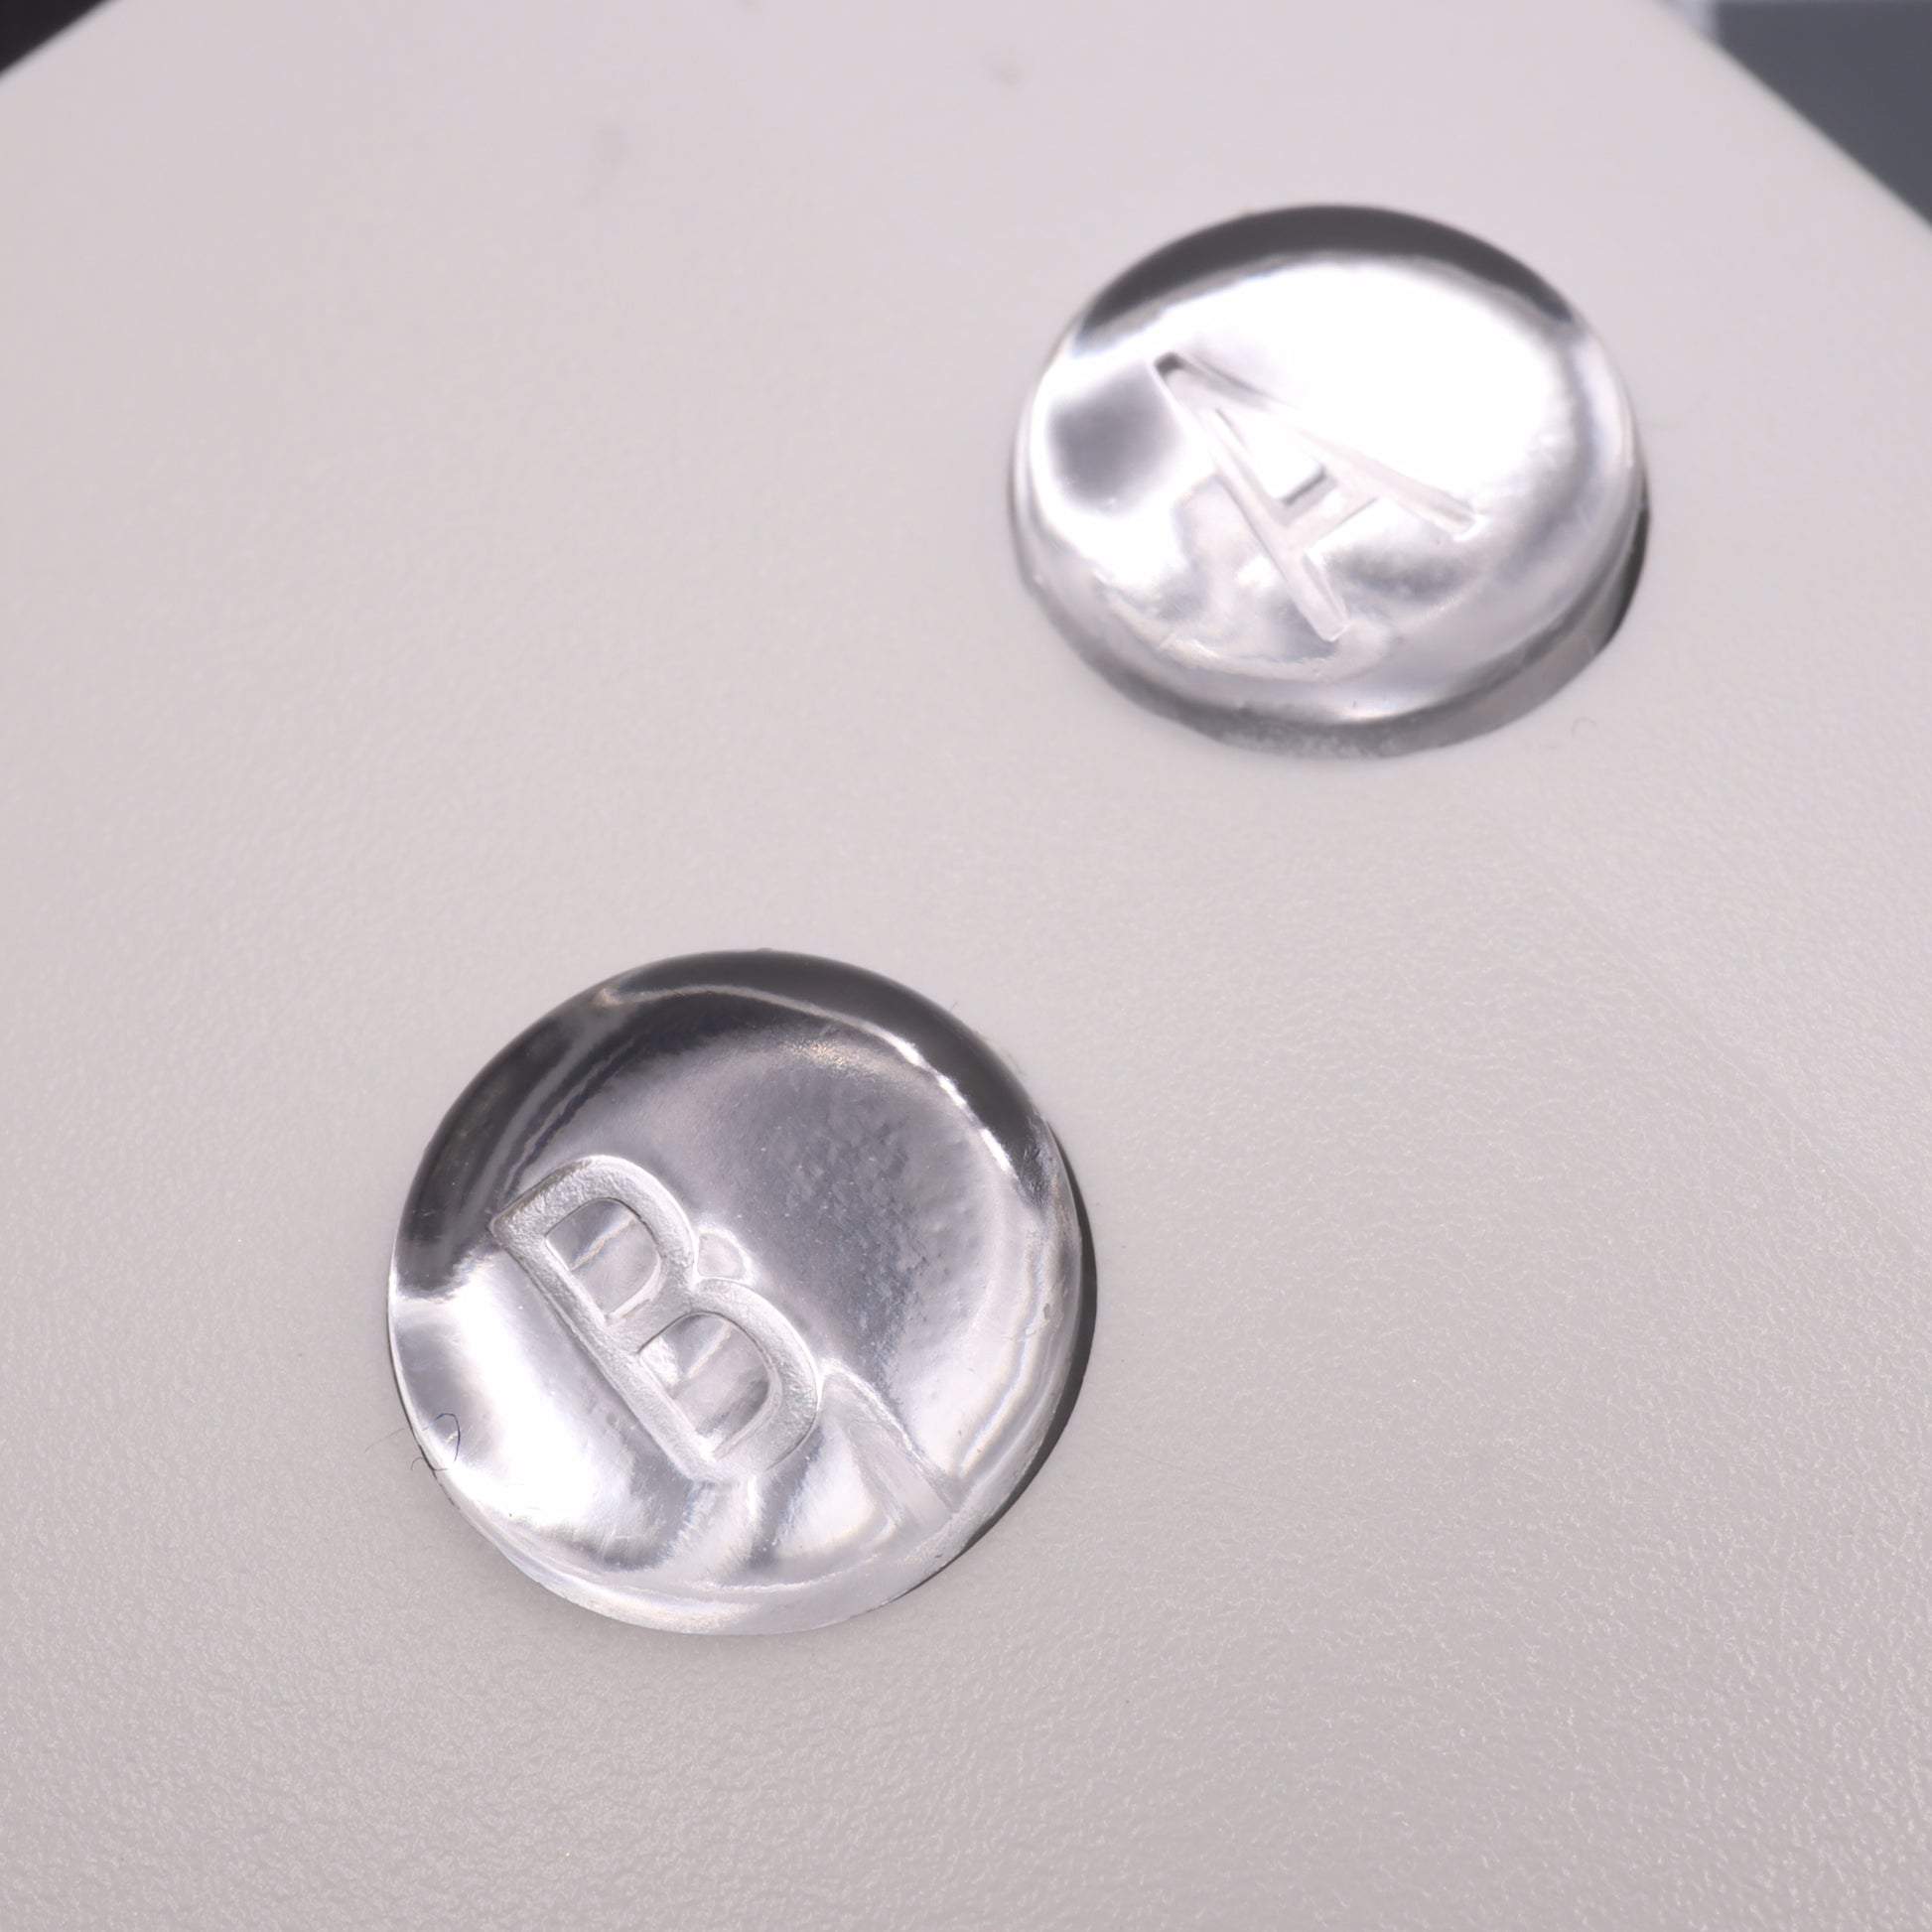 Game Boy Color buttons with lab fifteen co silver chrome custom buttons inside white shell